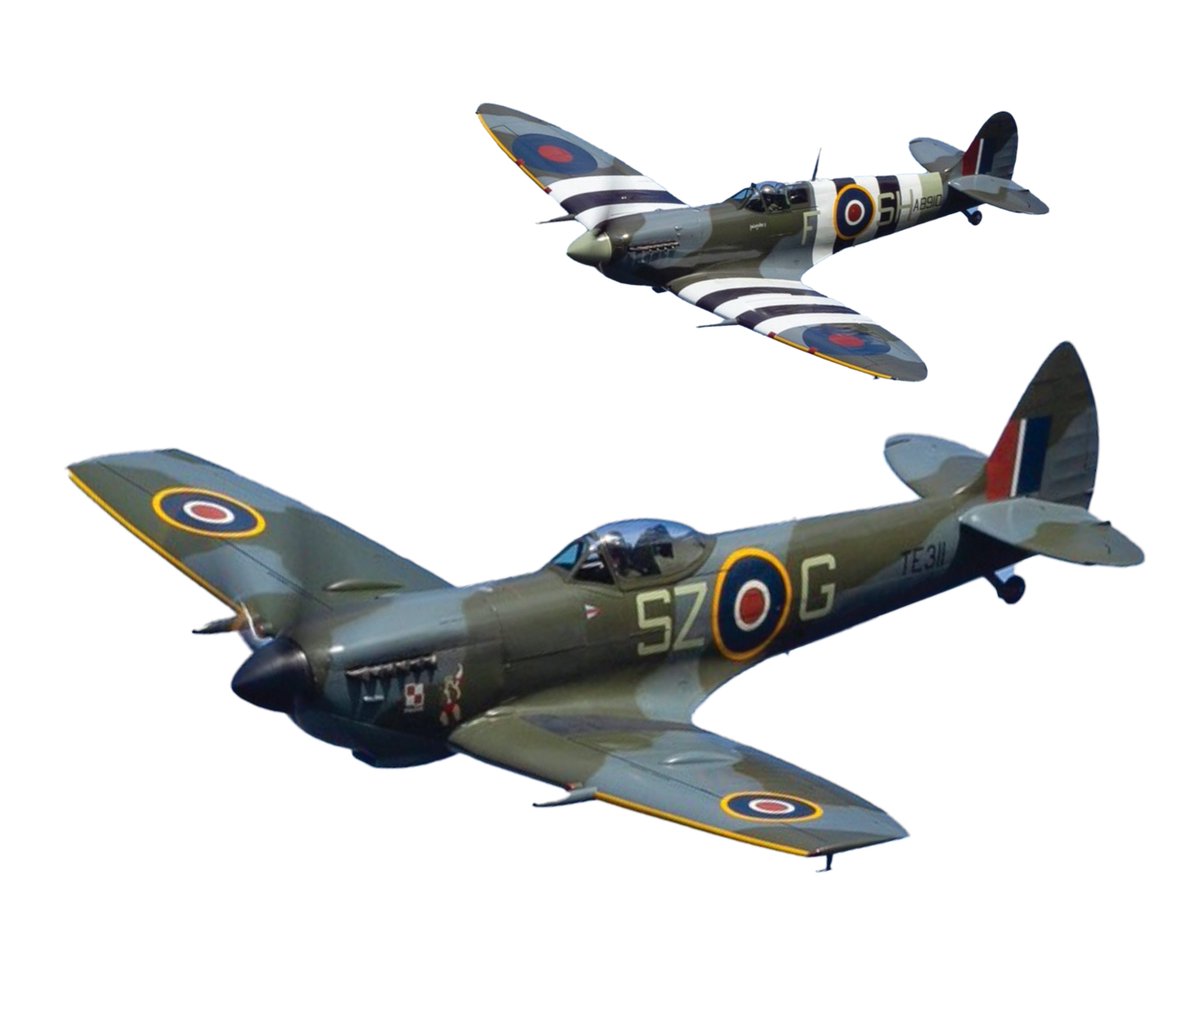 Get ready to LOOK UP ! On Sunday 11th August #BlueLightWeekend will welcome a spectacular Spitfire Tailchase display over #Withernsea. bluelightweekend.com